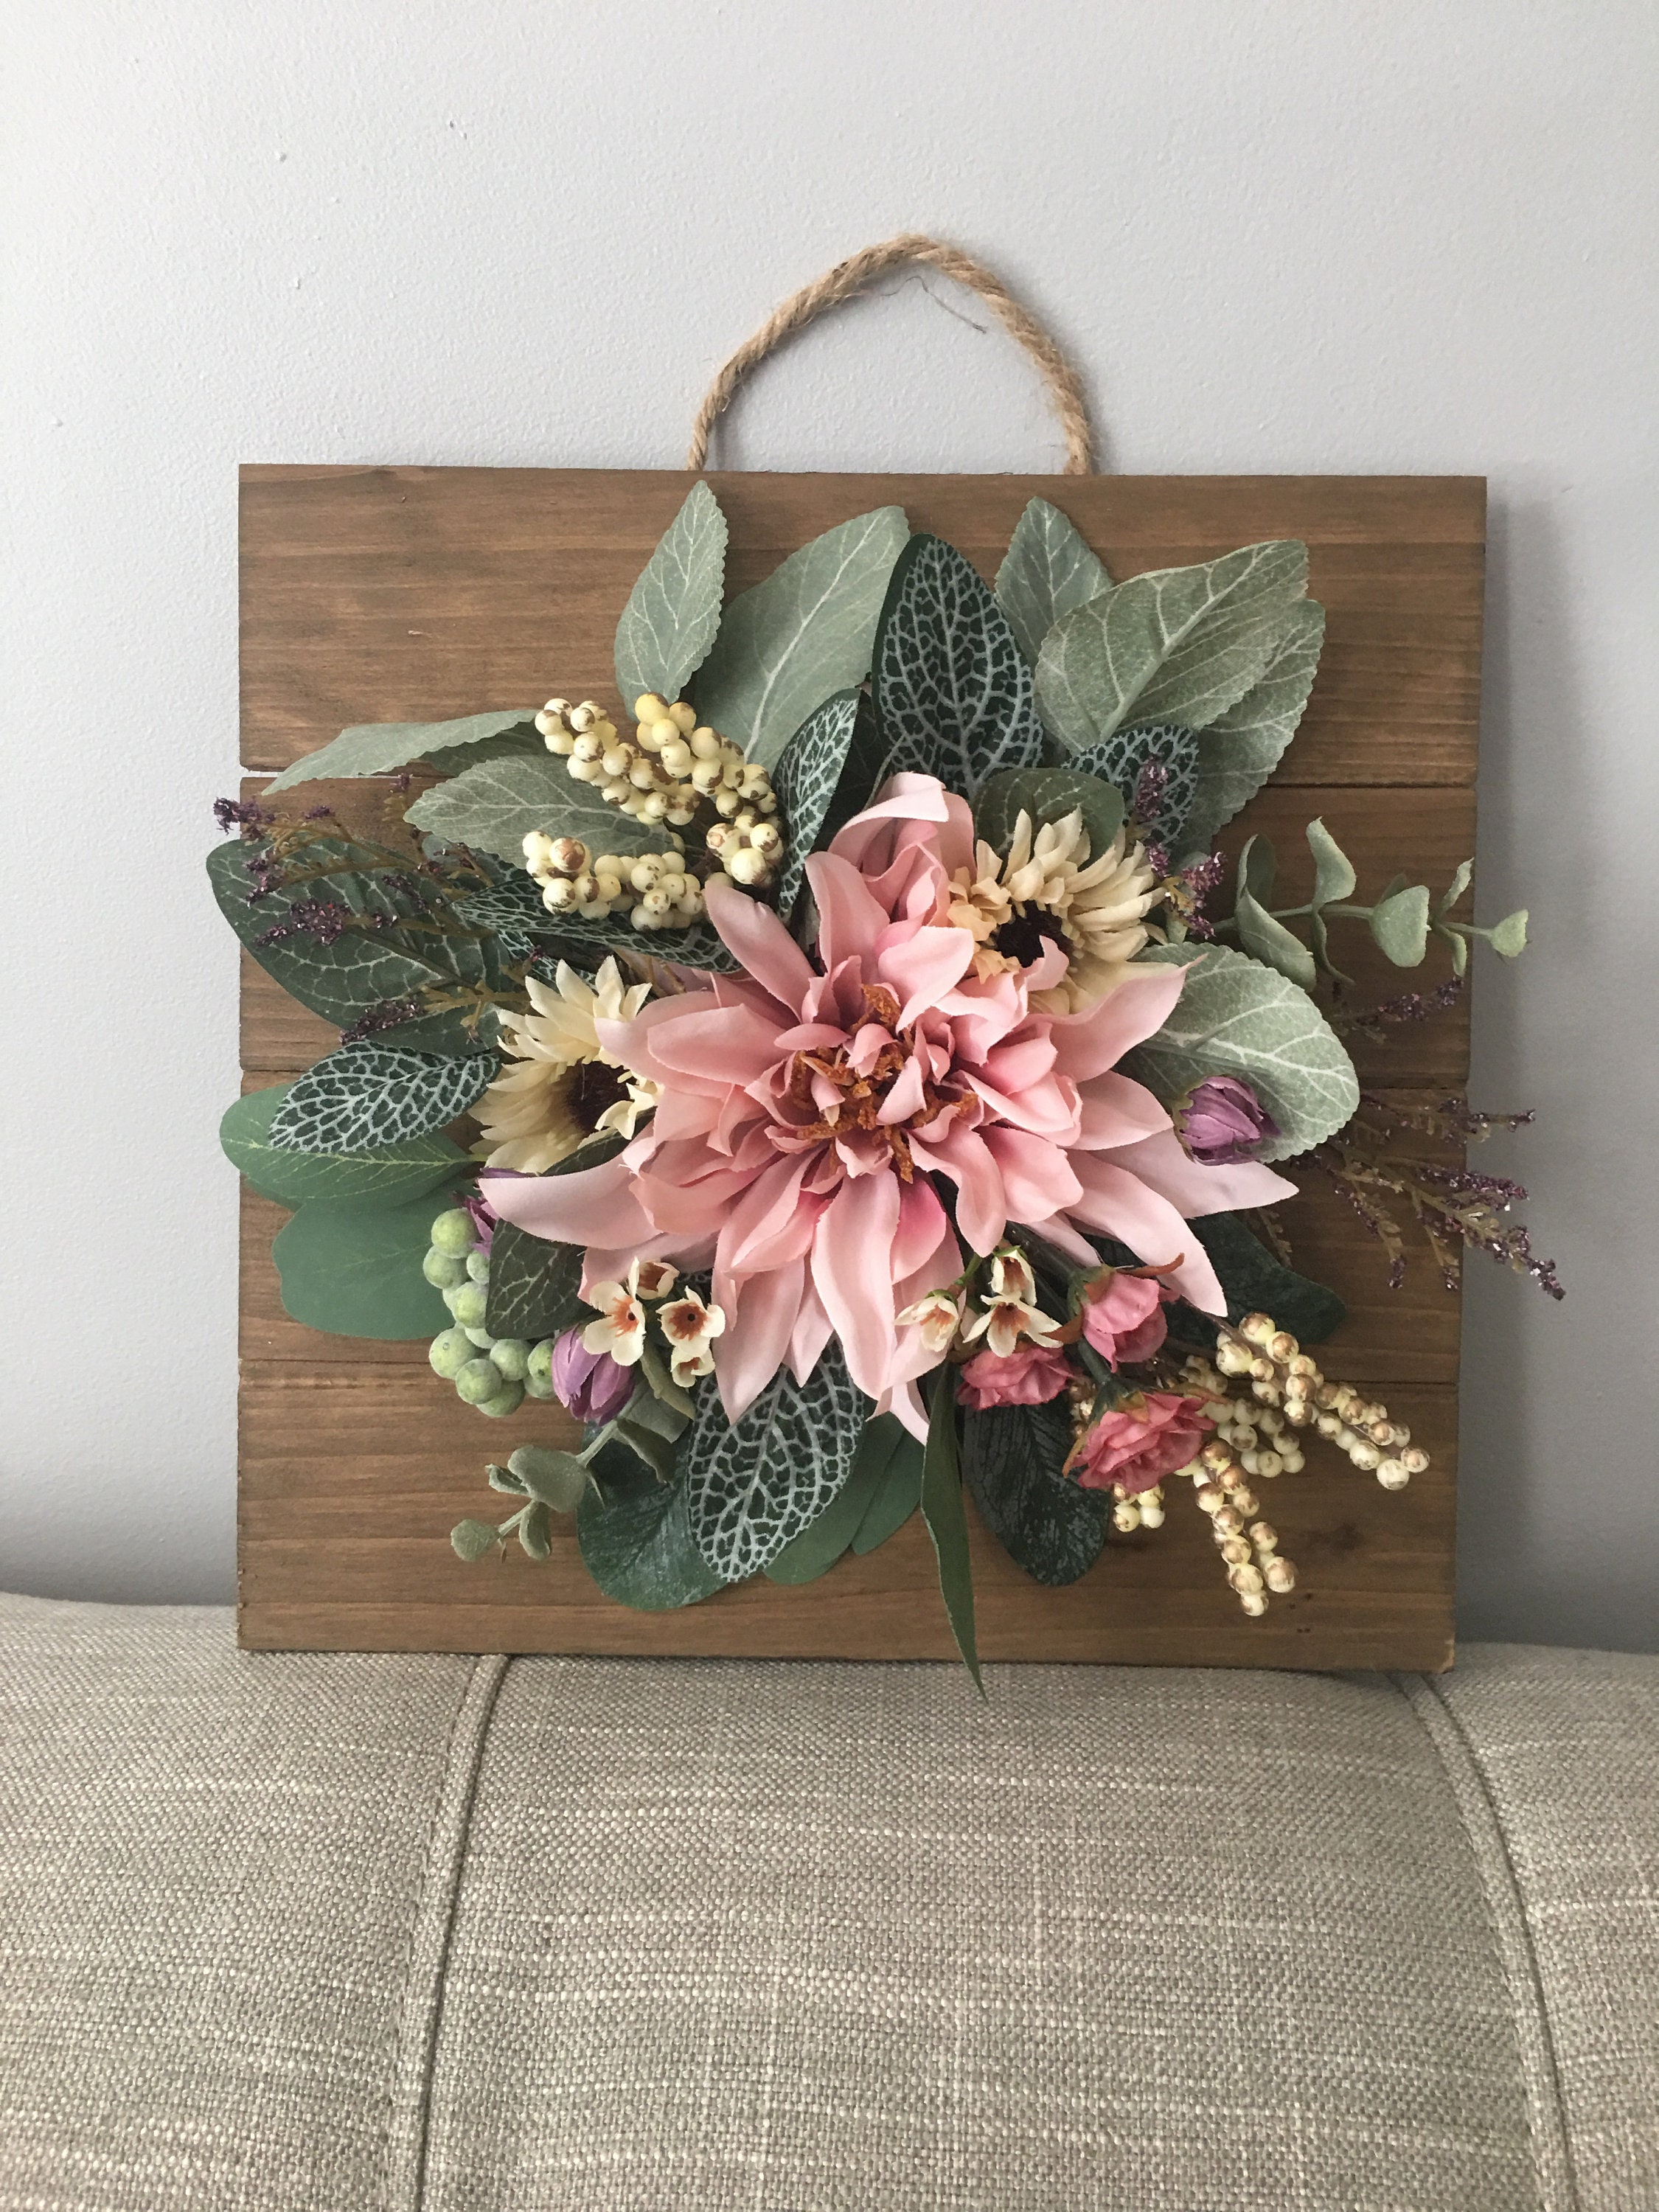 Ready To Ship Floral Wall Hanging Floral Nursery Wall Hanging Flower Art Nursery Wall Decor Wall Decor Door Wreath Wall Hanging